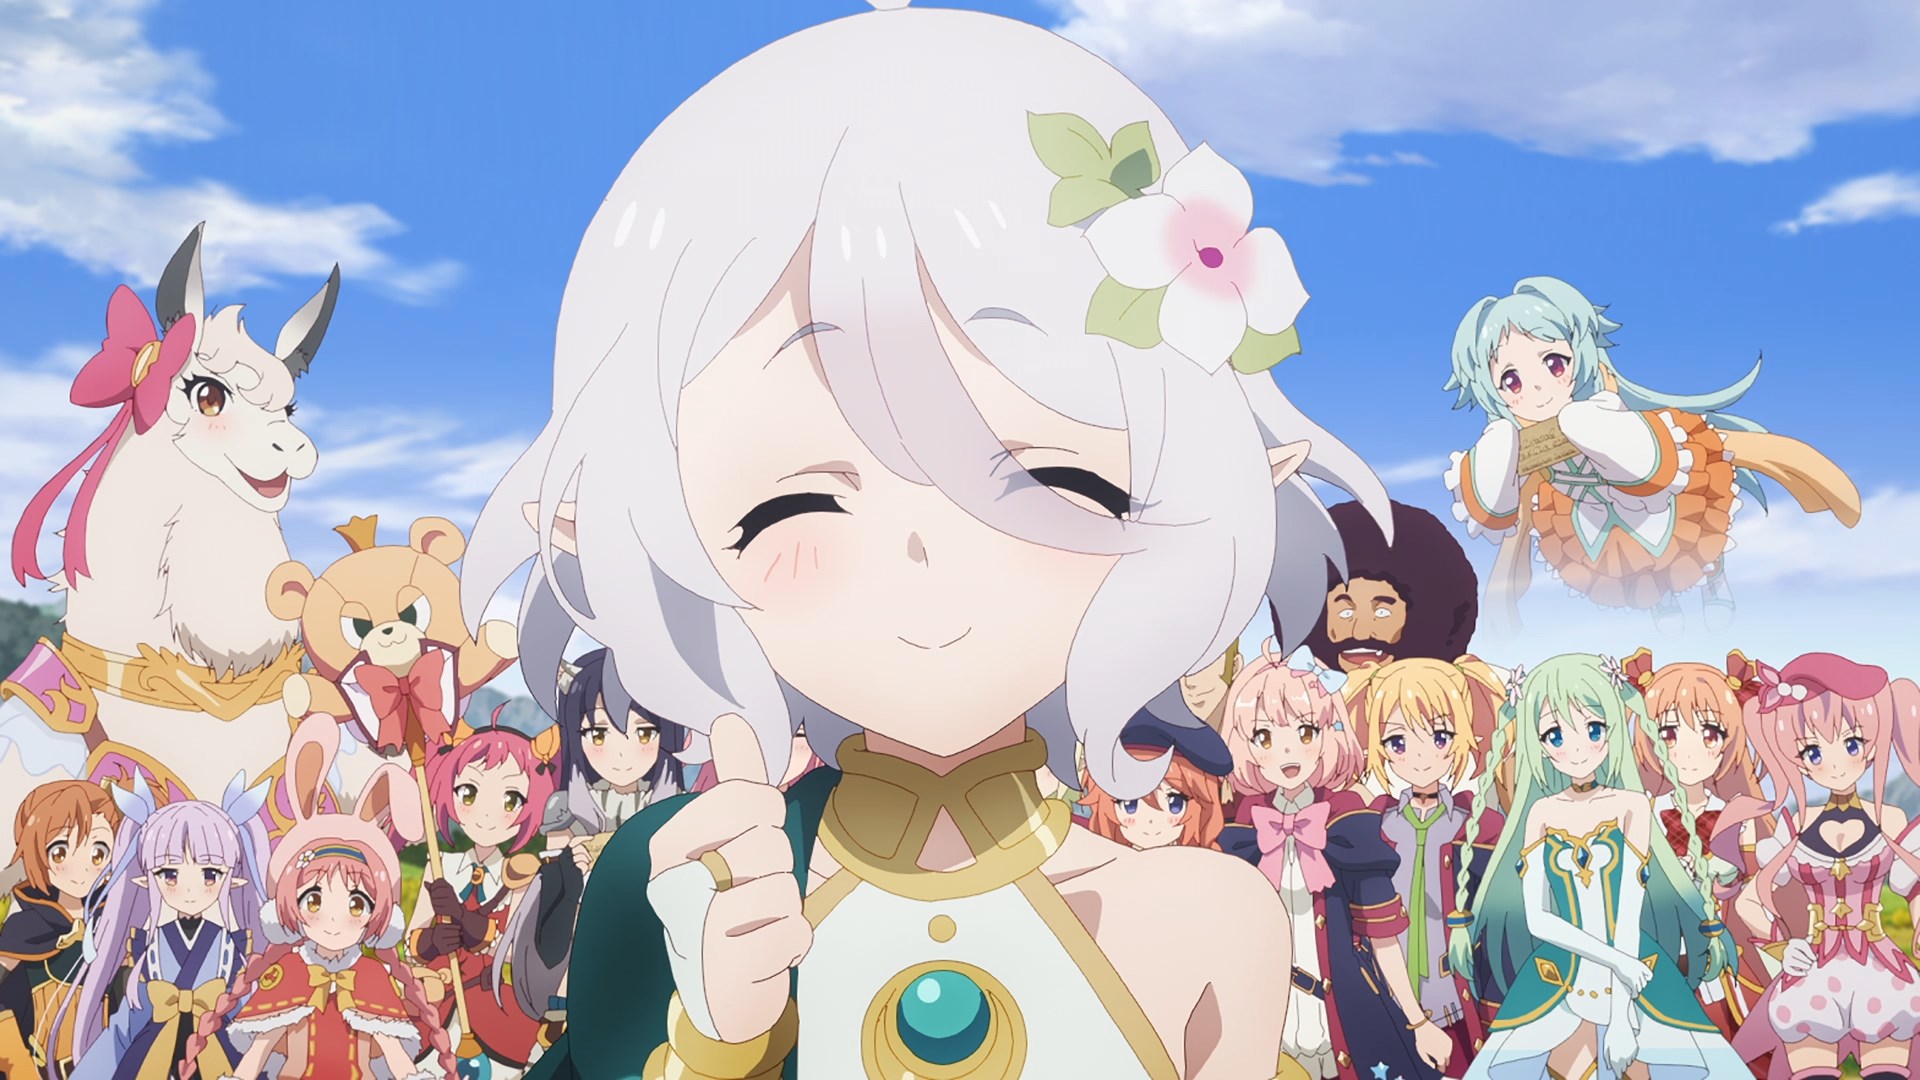 Princess Connect! Re:Dive Season 2 - 08 (Kokkoro's Adventure with a Side of  Plot #PrincessConnect) - AstroNerdBoy's Anime & Manga Blog | AstroNerdBoy's  Anime & Manga Blog